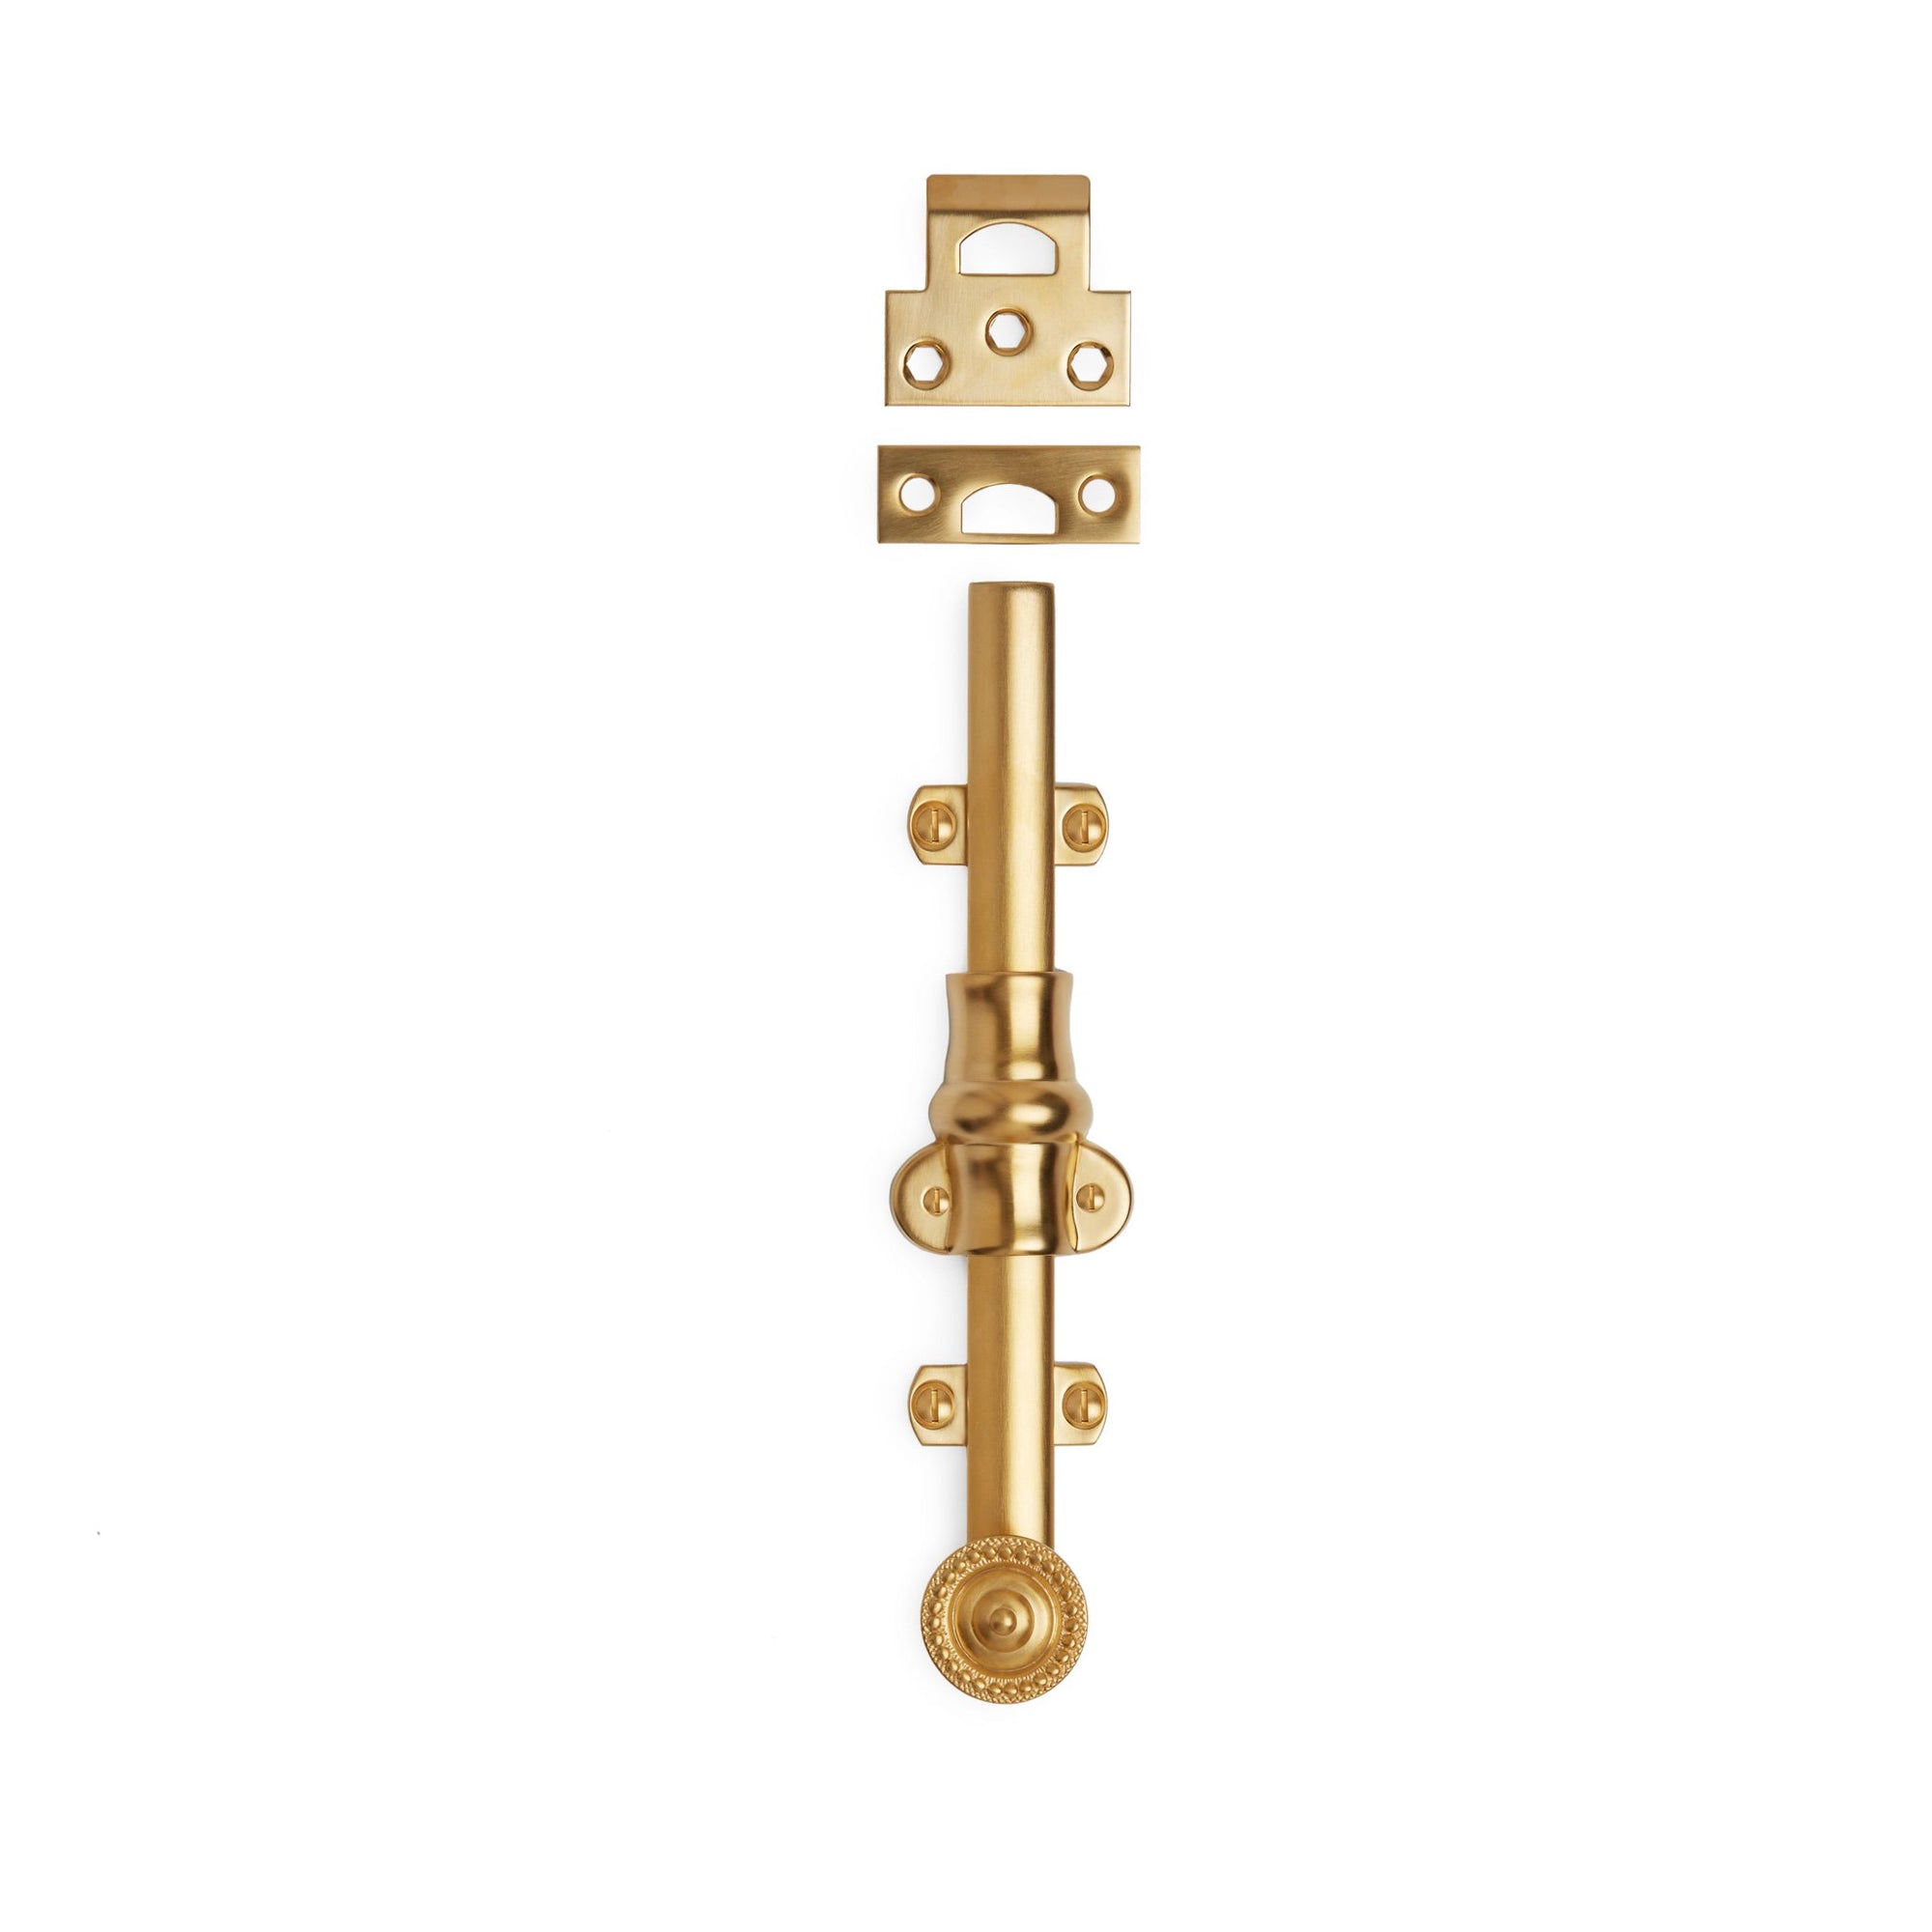 2913-1-1067-GP Sherle Wagner International Slide Bolt with Classical Pull in Gold Plate metal finish